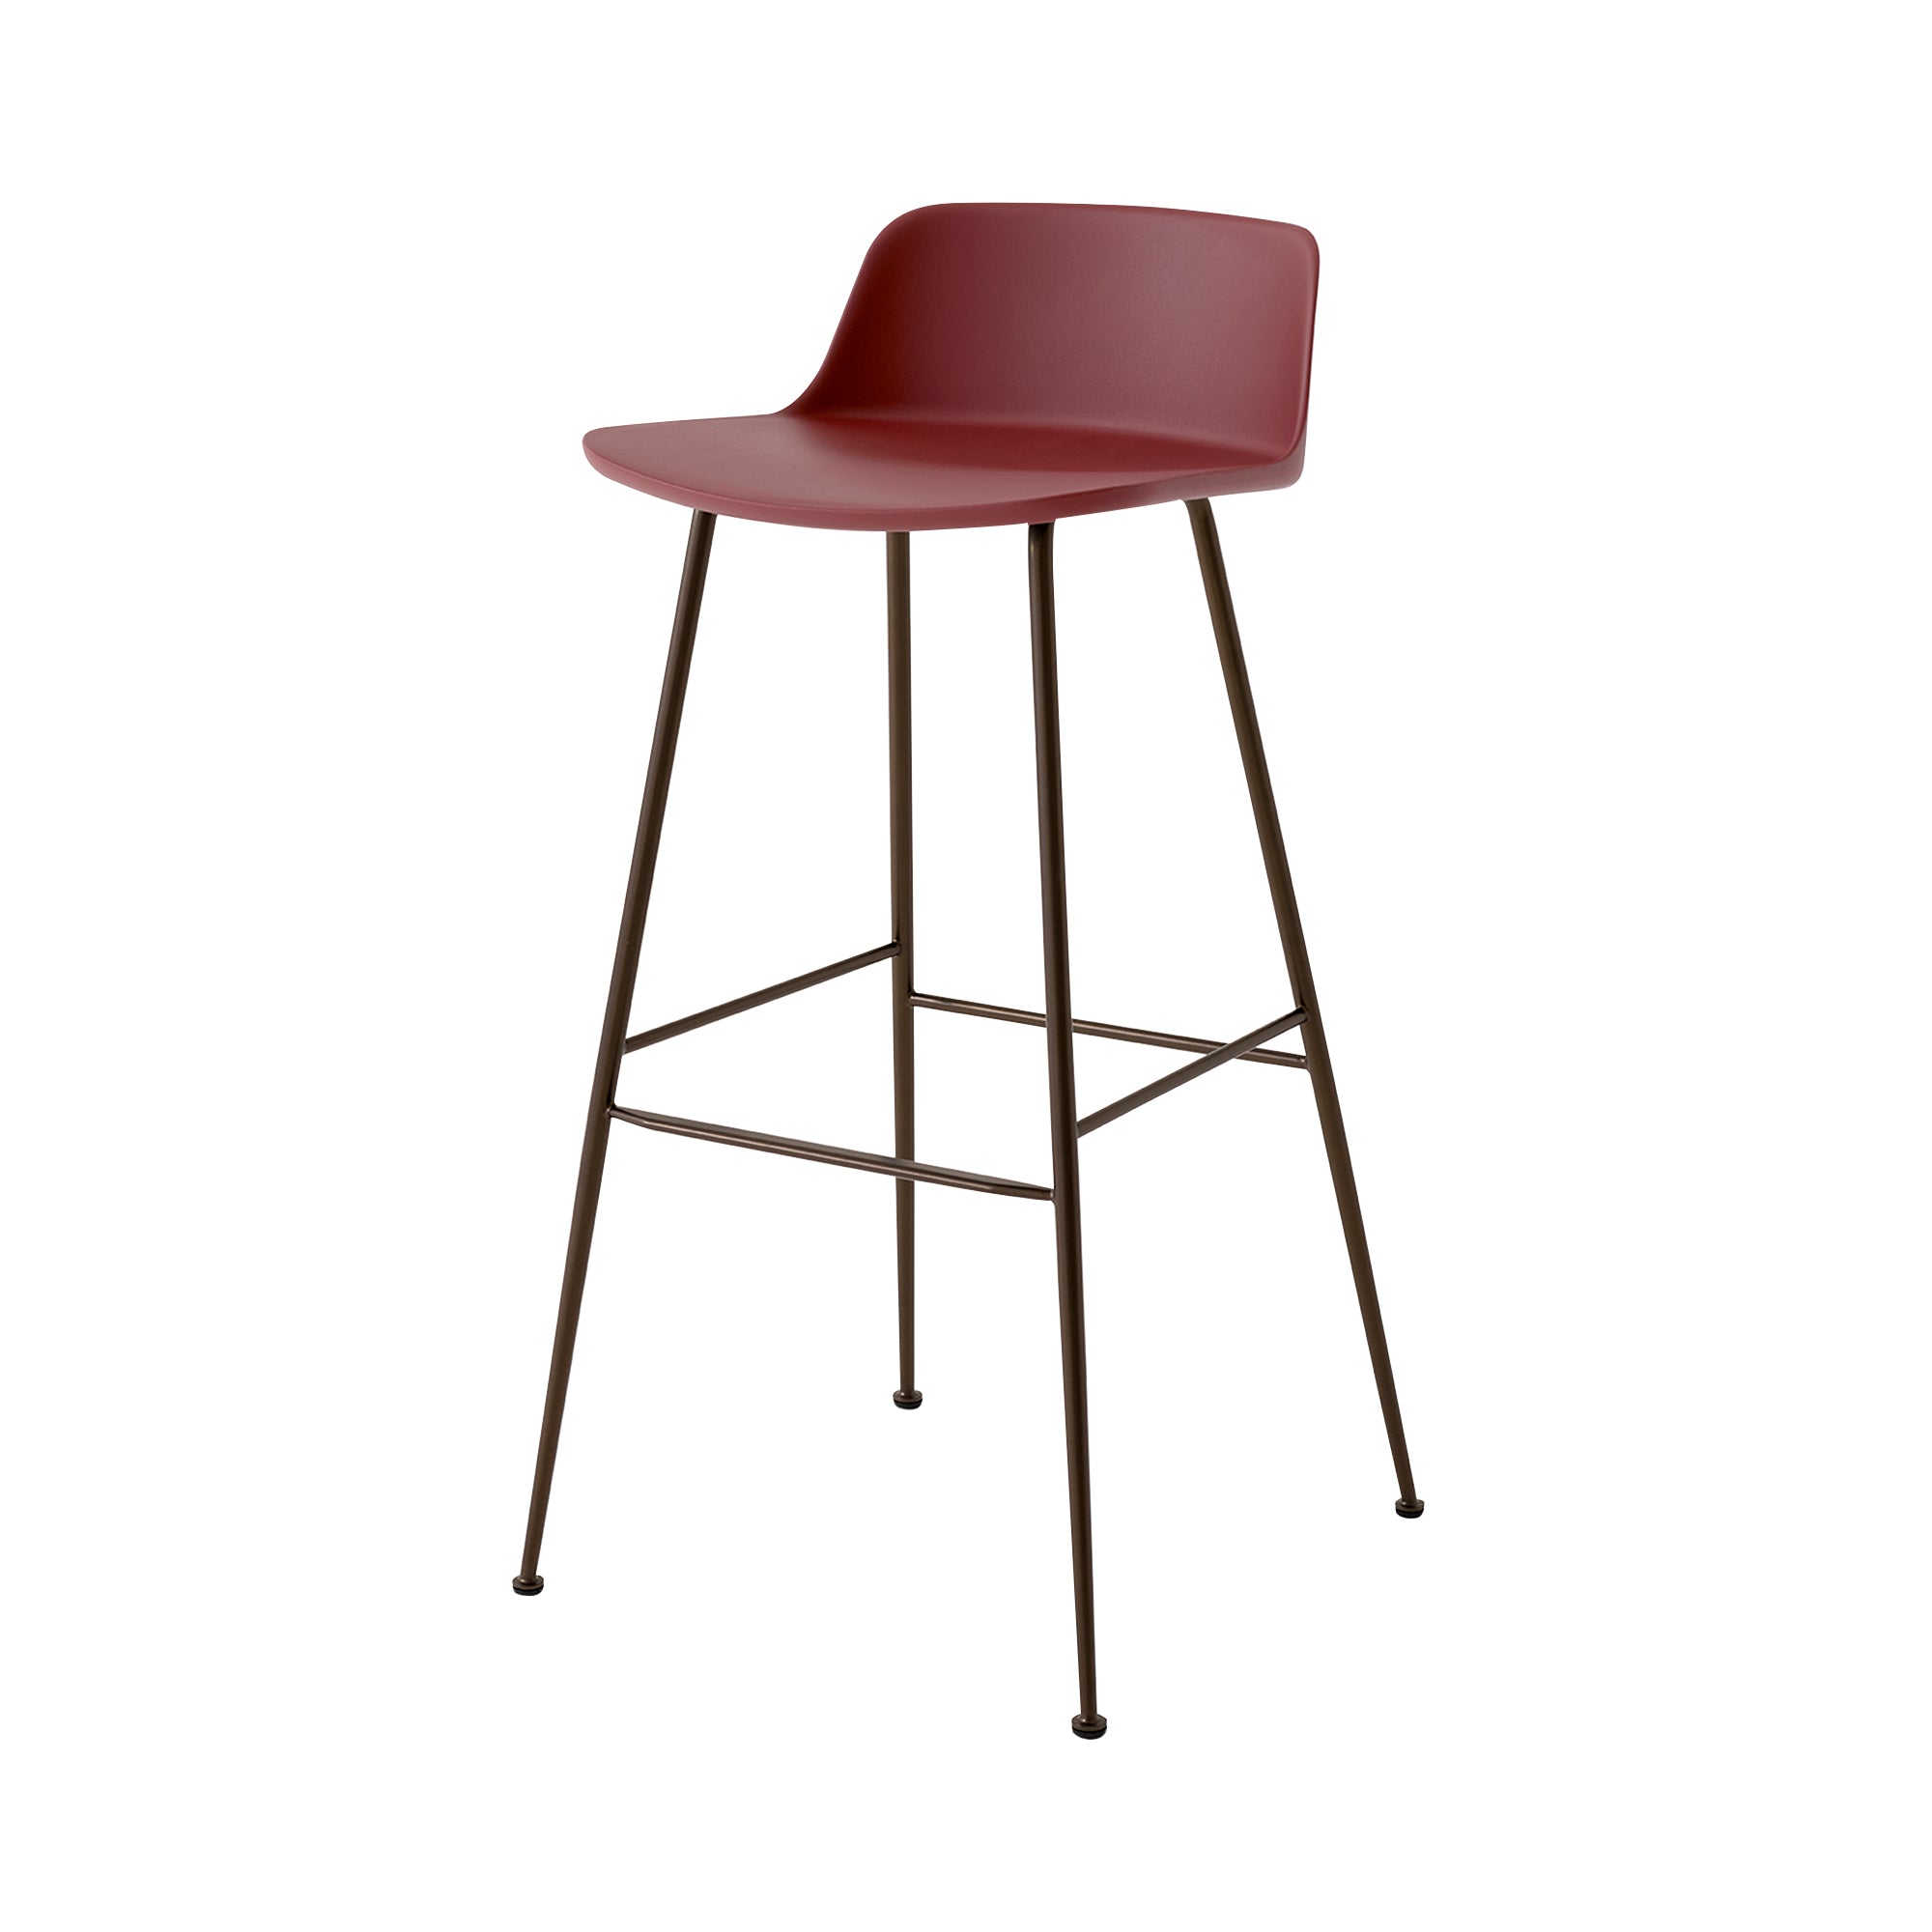 Rely Bar + Counter Lowback Stool: HW81 + HW86 + Bar (HW86) + Red Brown + Bronzed